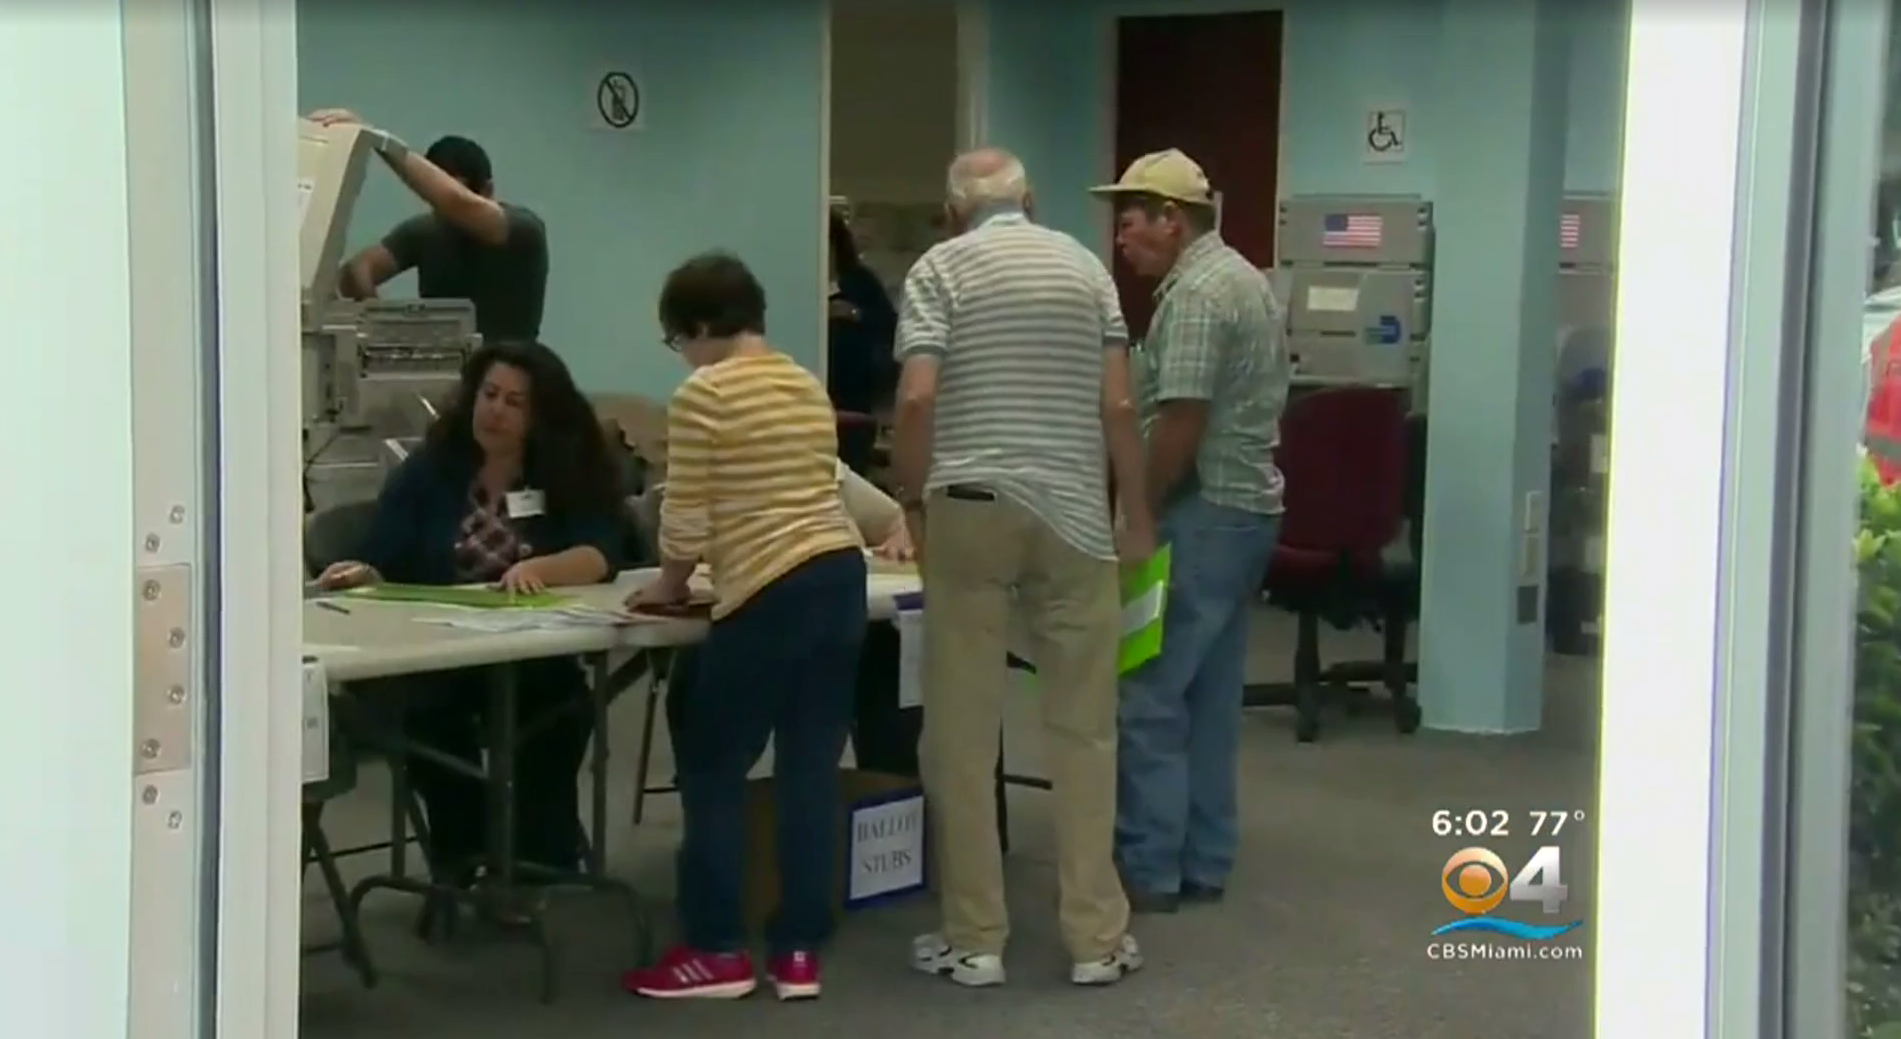 Gladys Coego Tomika Curgil Arrested For Voter Fraud In Miami CBS News